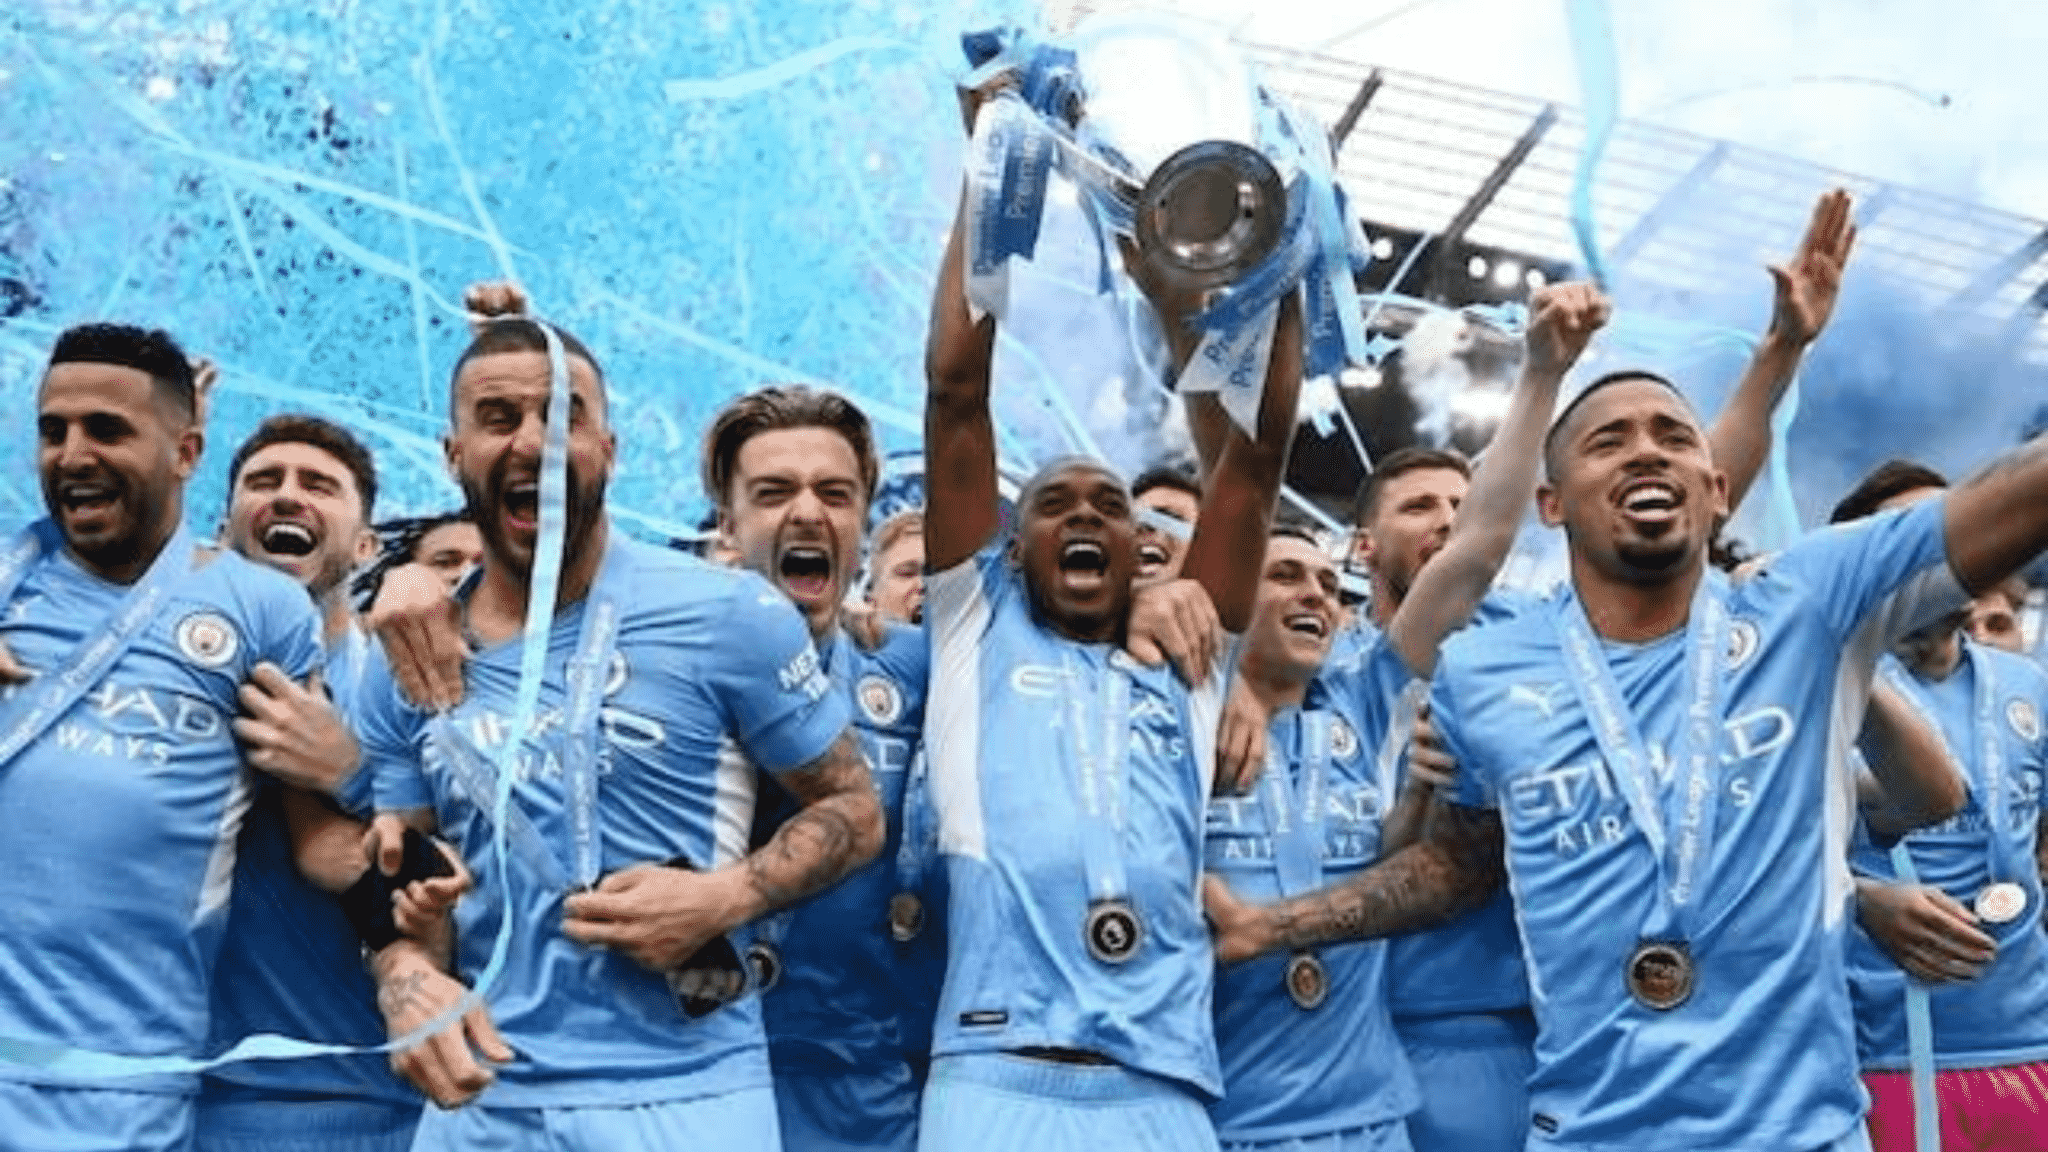 Reactions: Foden, Stones, Grealish on tough title win for Man City, My Football Facts